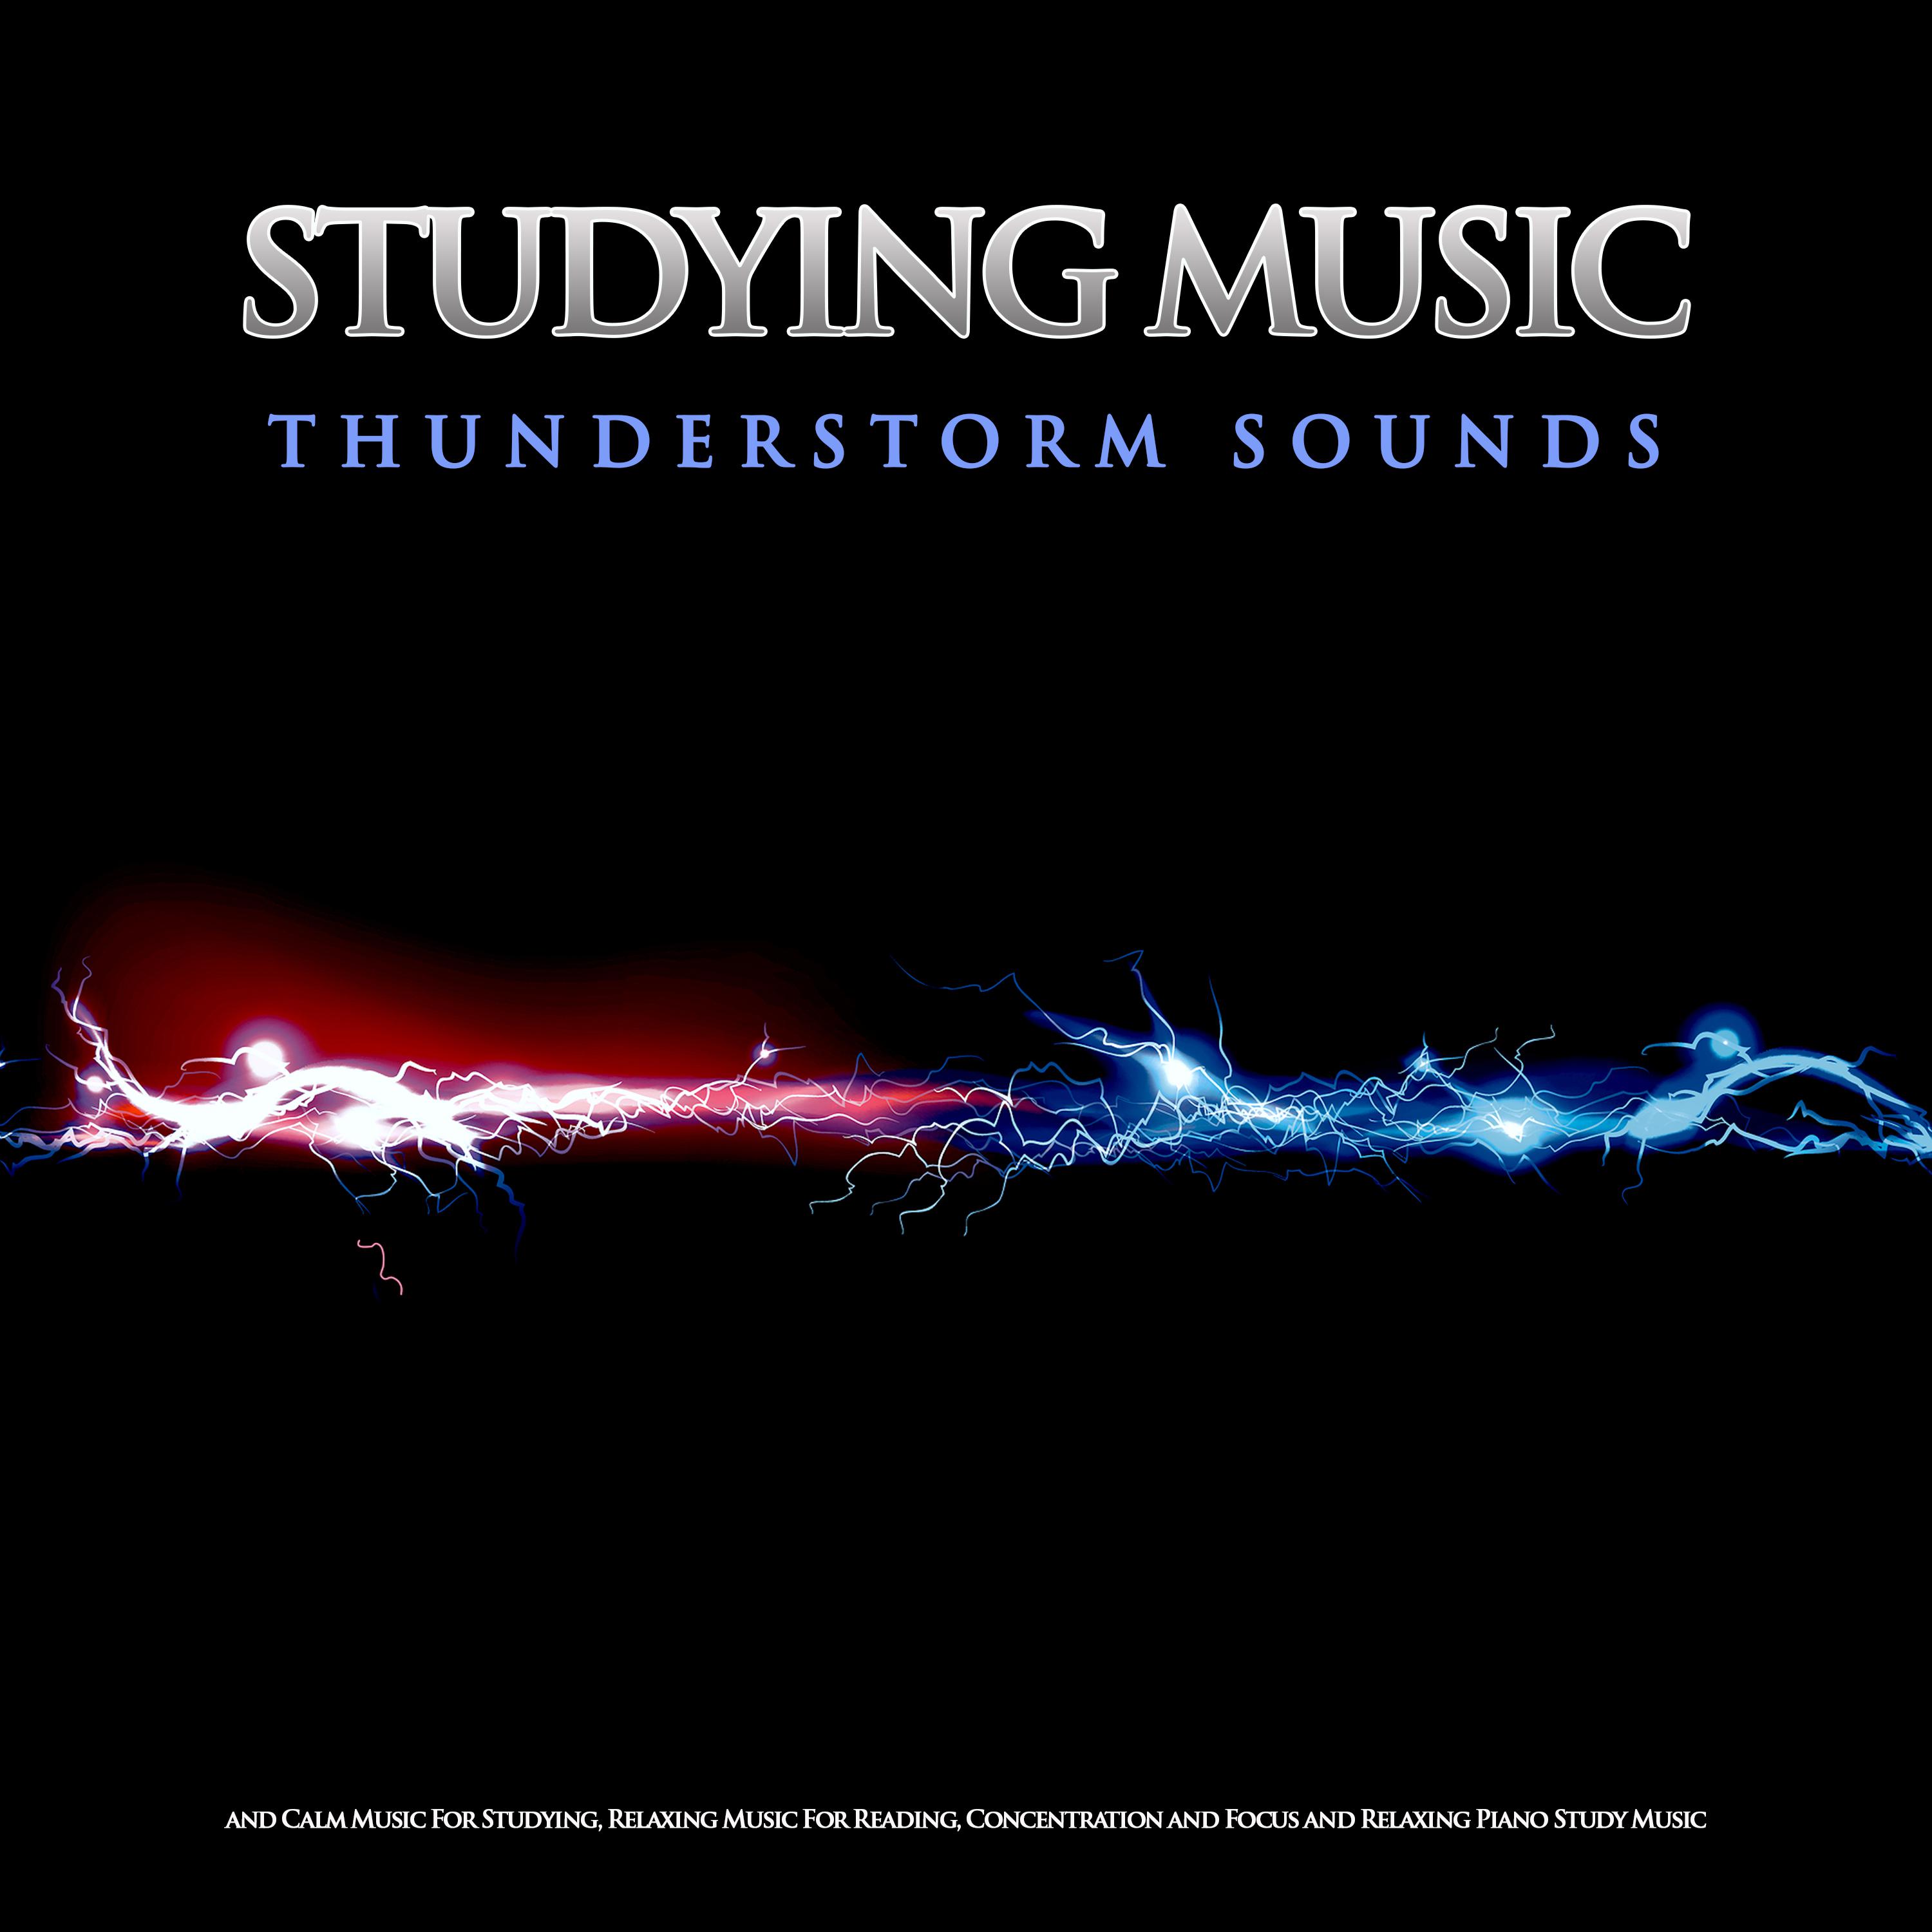 Studying Music: Thunderstorm Sounds and Calm Music For Studying, Relaxing Music For Reading, Concentration and Focus and Relaxing Piano Study Music